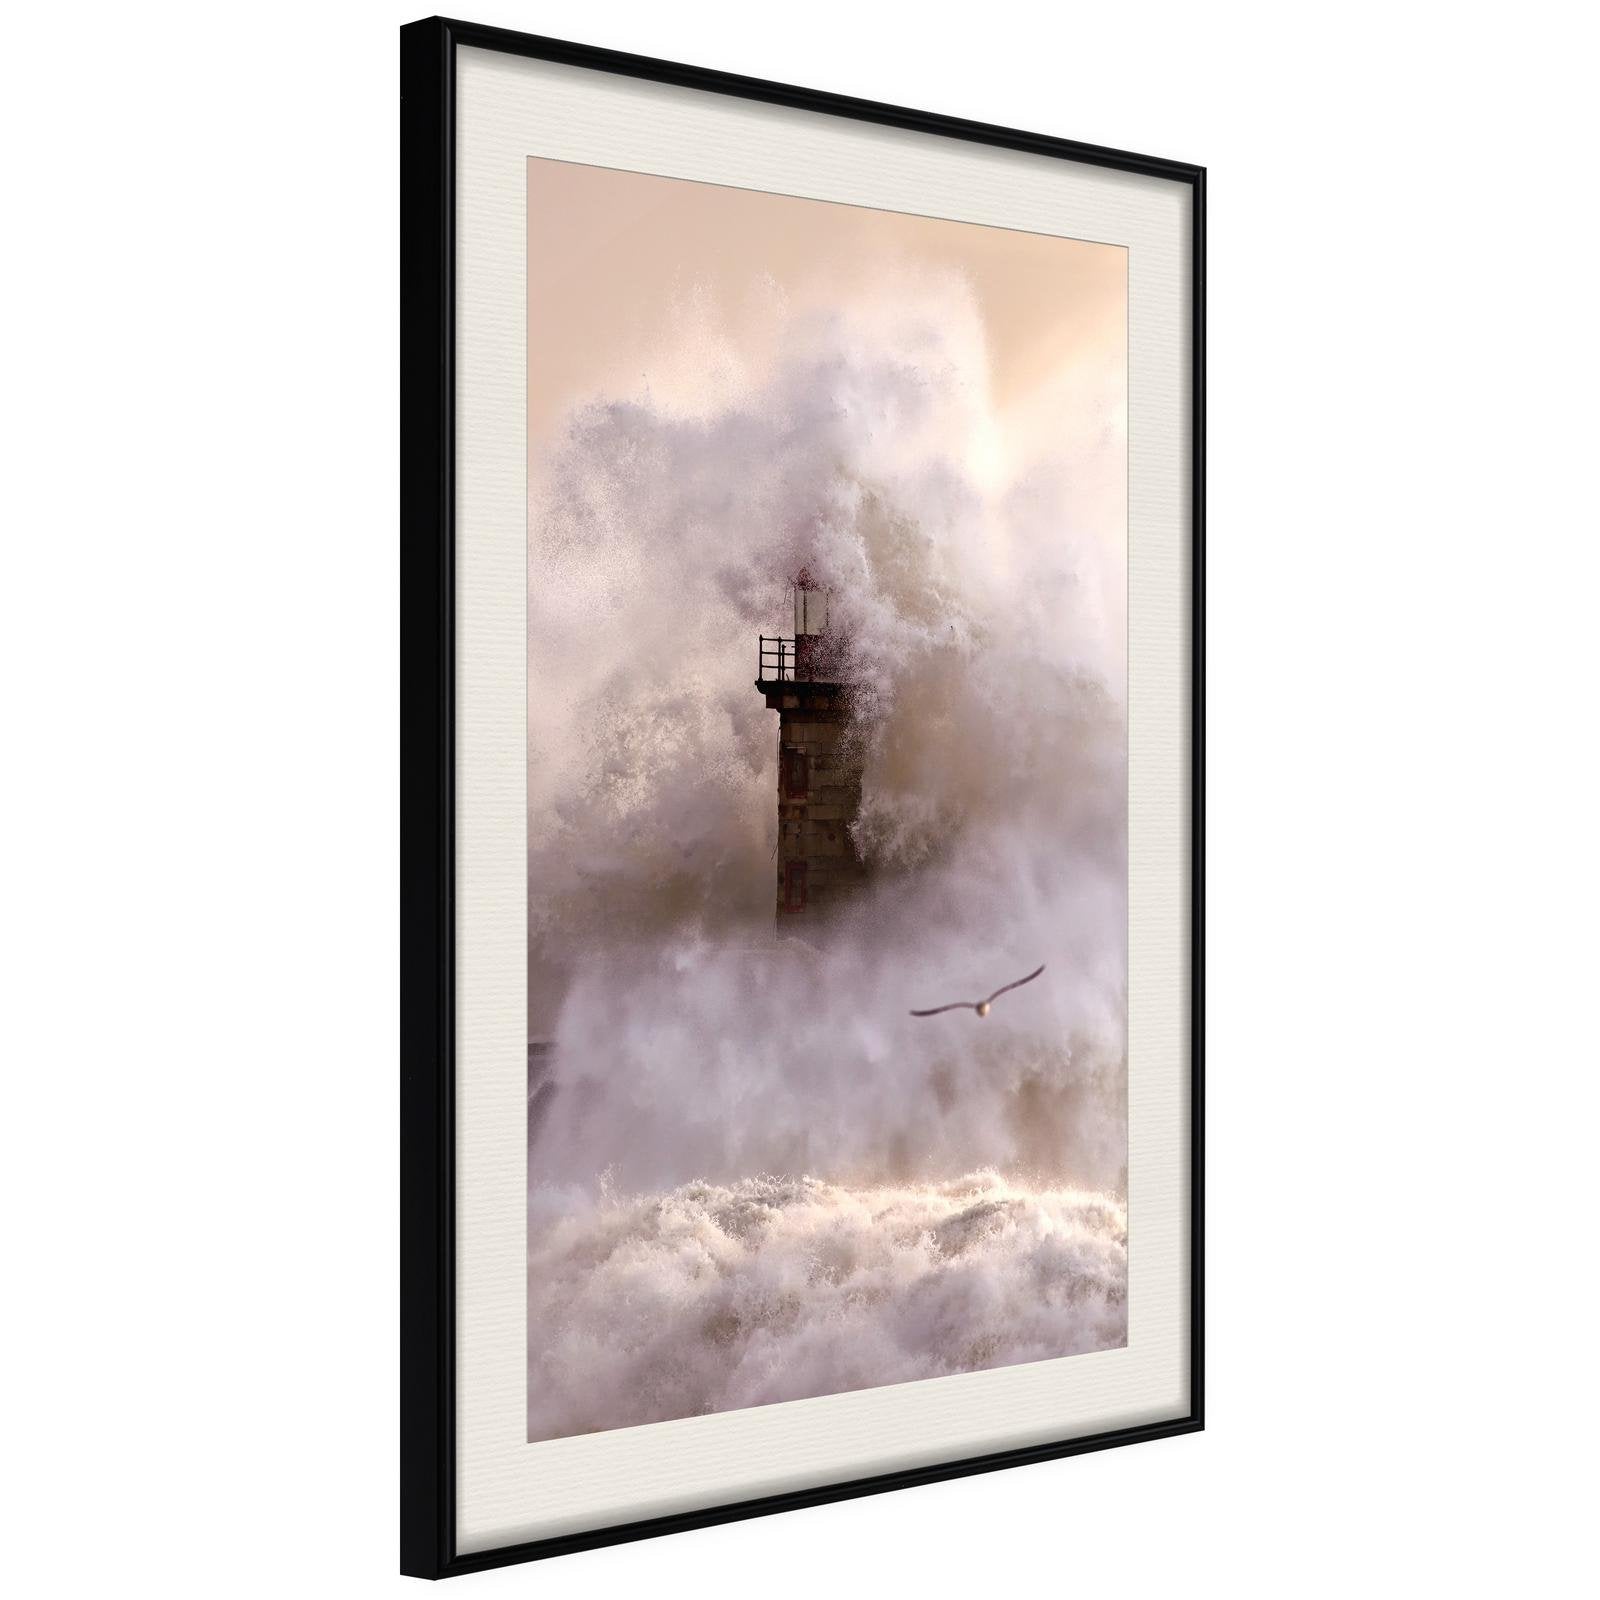 Inramad Poster / Tavla - Lighthouse During a Storm-Poster Inramad-Artgeist-20x30-Svart ram med passepartout-peaceofhome.se